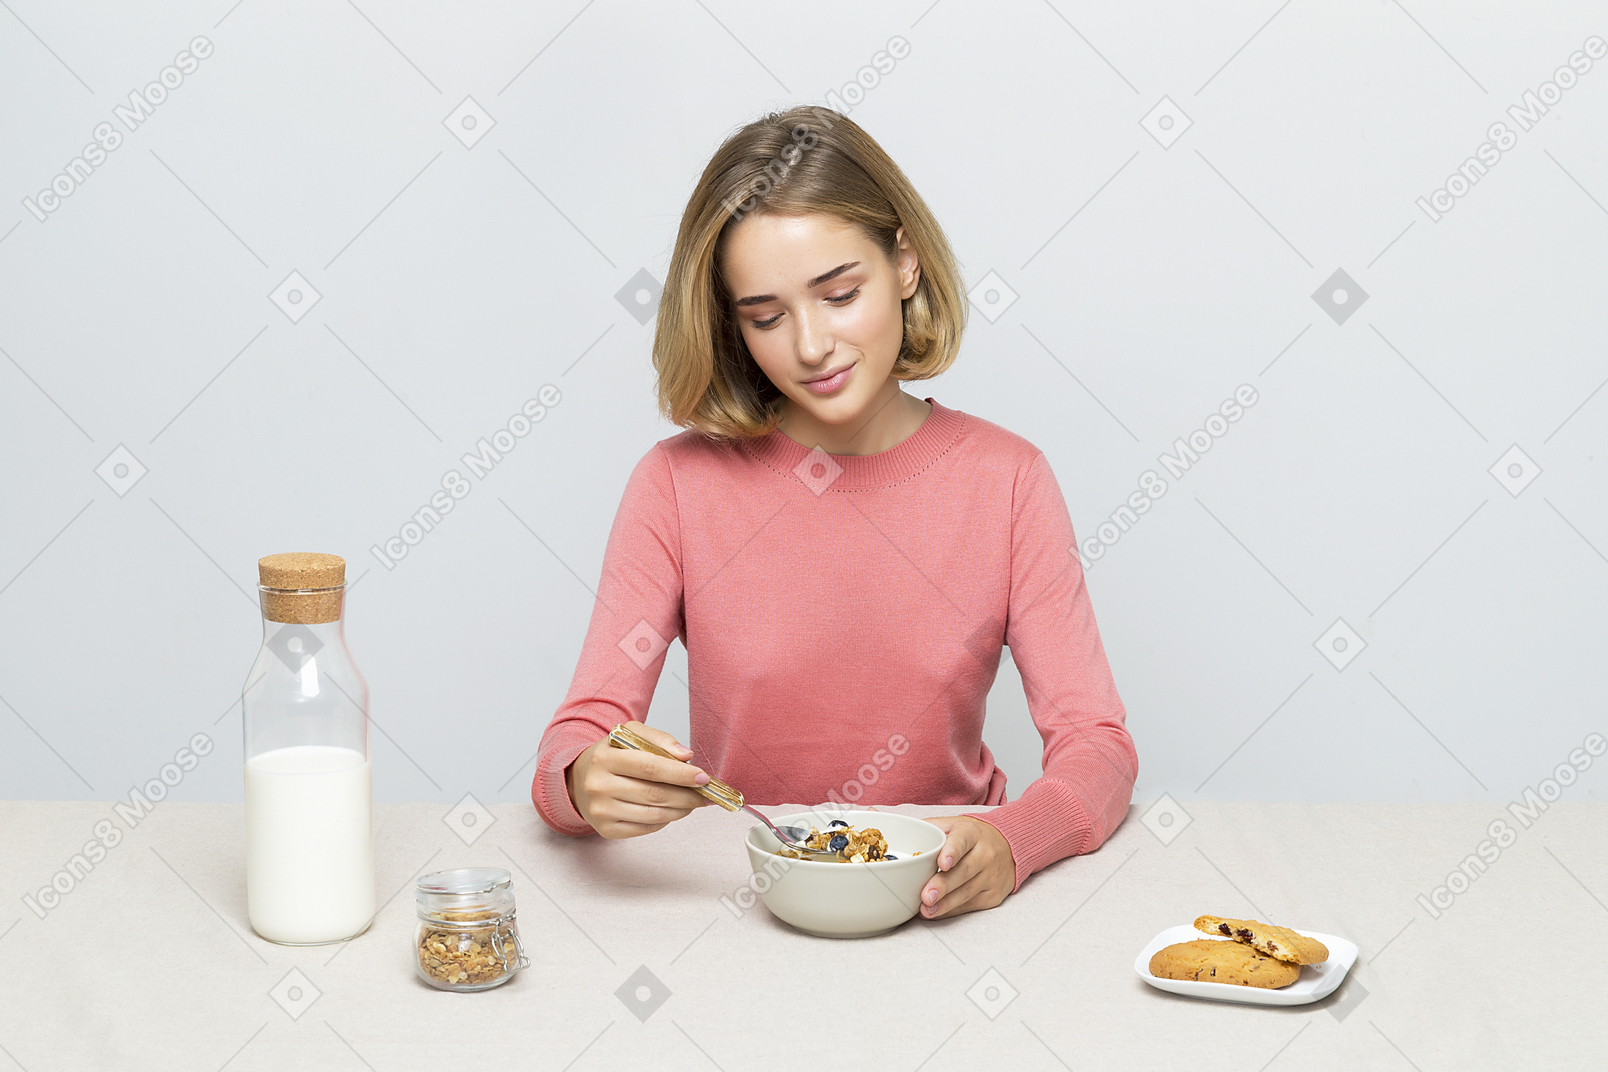 Cereal and cookies are my kind of morning meal